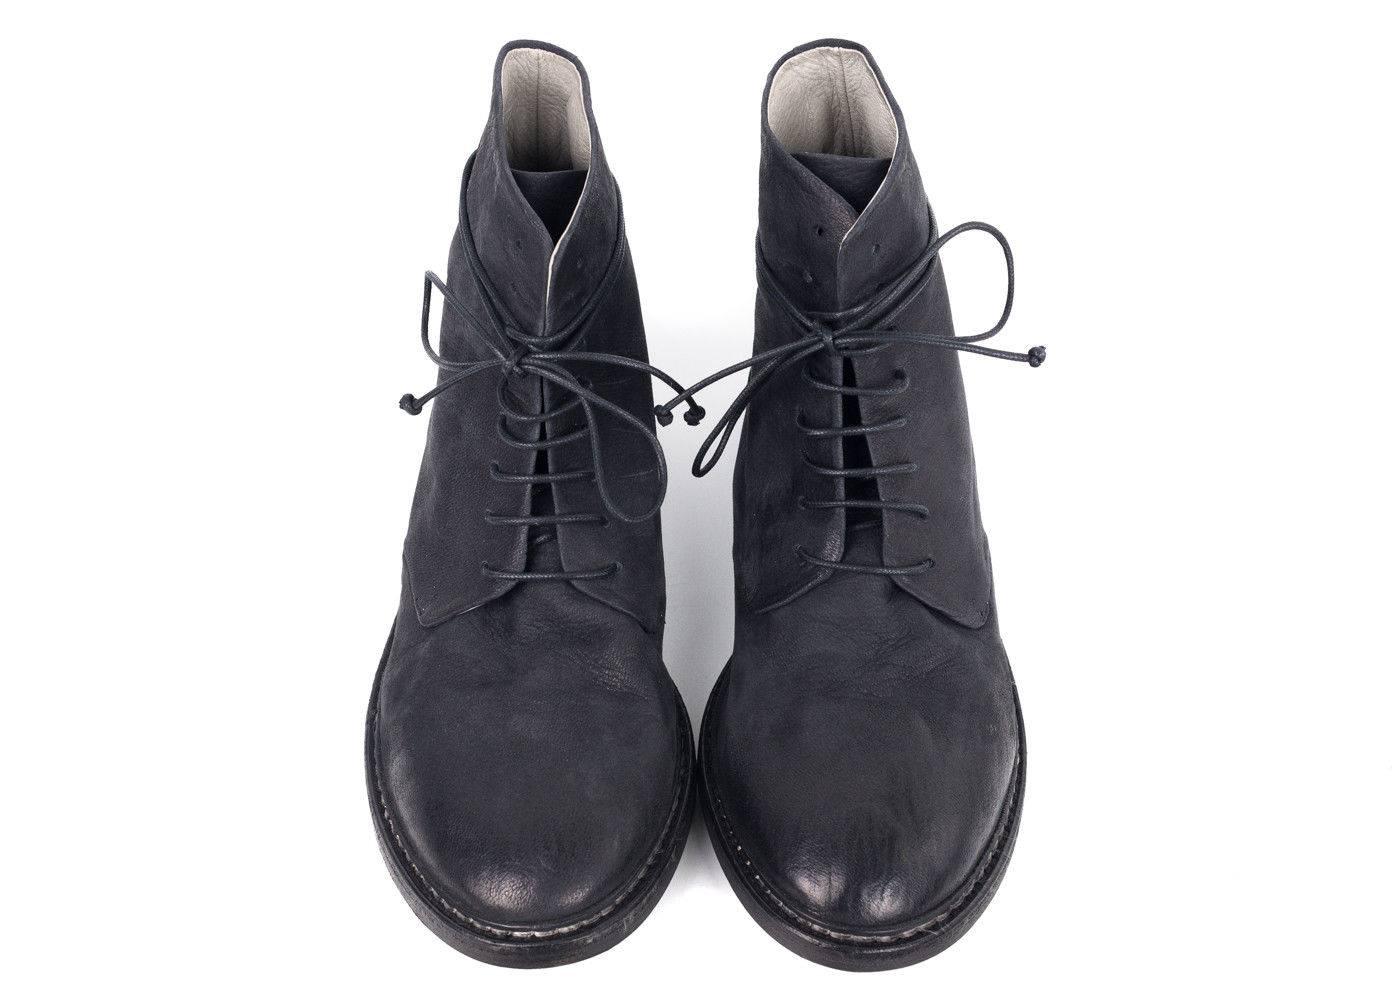 From the desire to create the highest quality and long wearing shoes for your everyday wear comes the Italian luxury brand Marsell. The Grupiatta boot in a lace-up combat boot style is crafted of supple full grain smokey black leather, accented by a